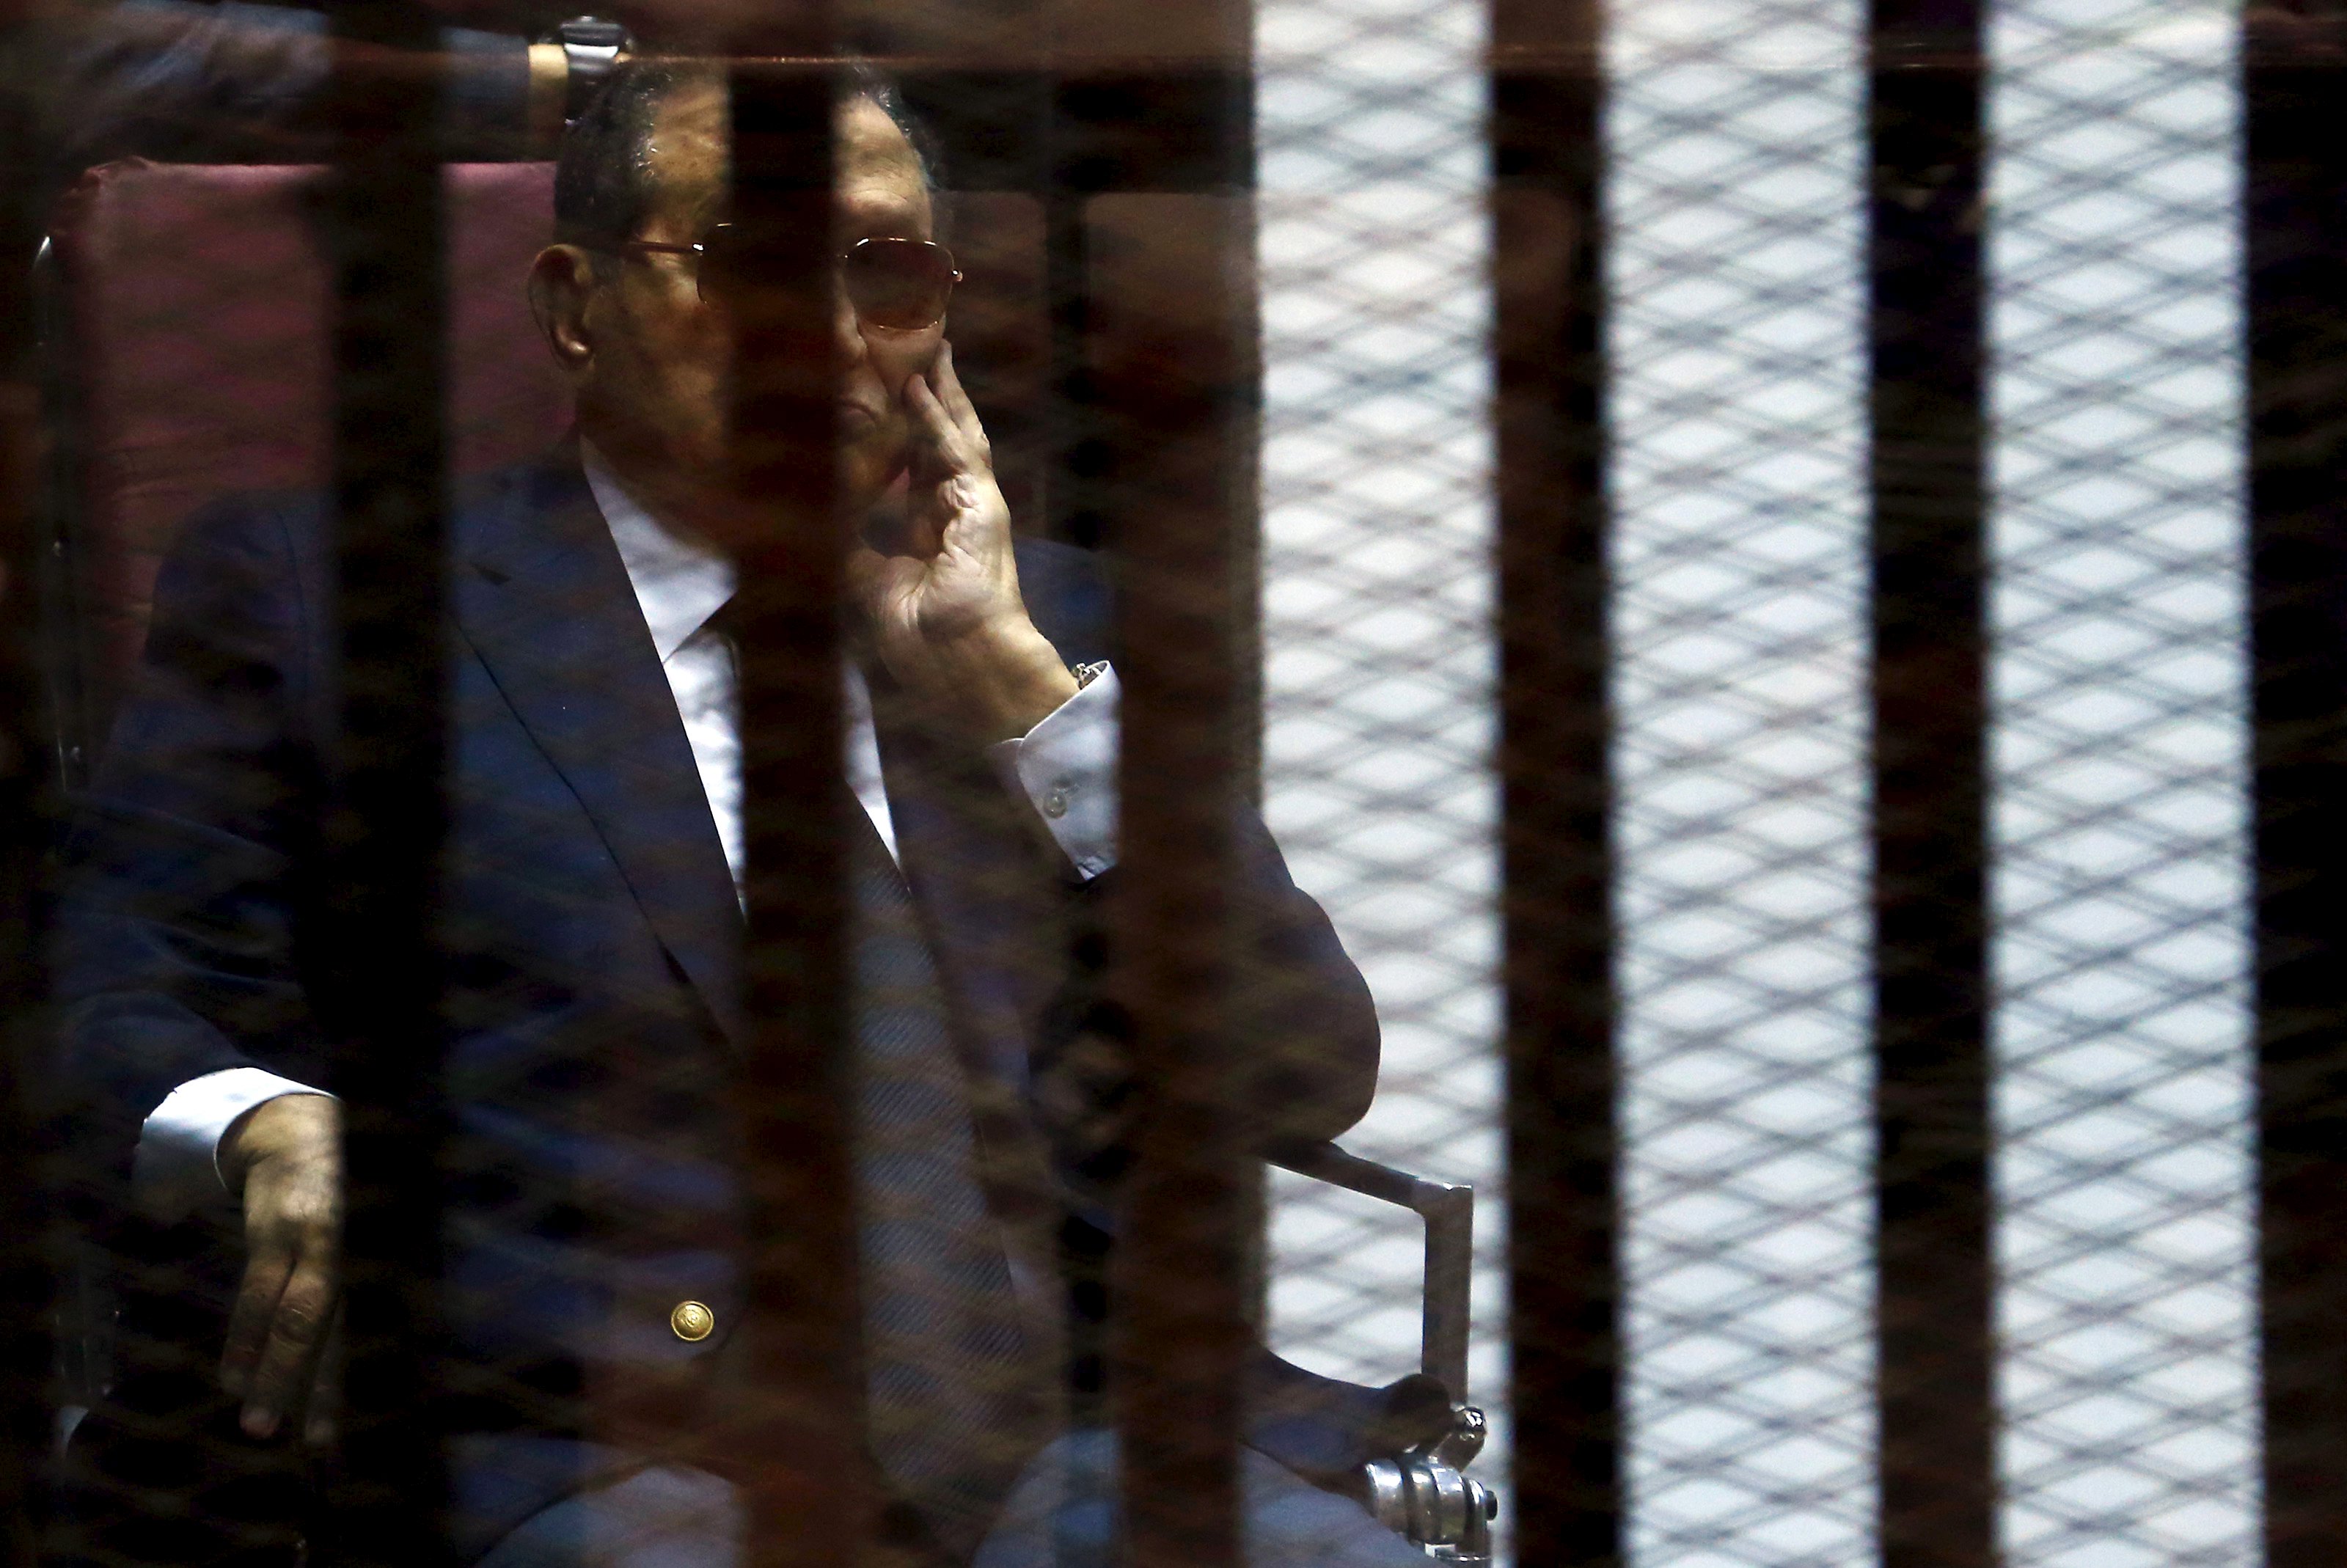 Egypt's former president Hosni Mubarak reacts inside a dock during his trial at the police academy, on the outskirts of Cairo.